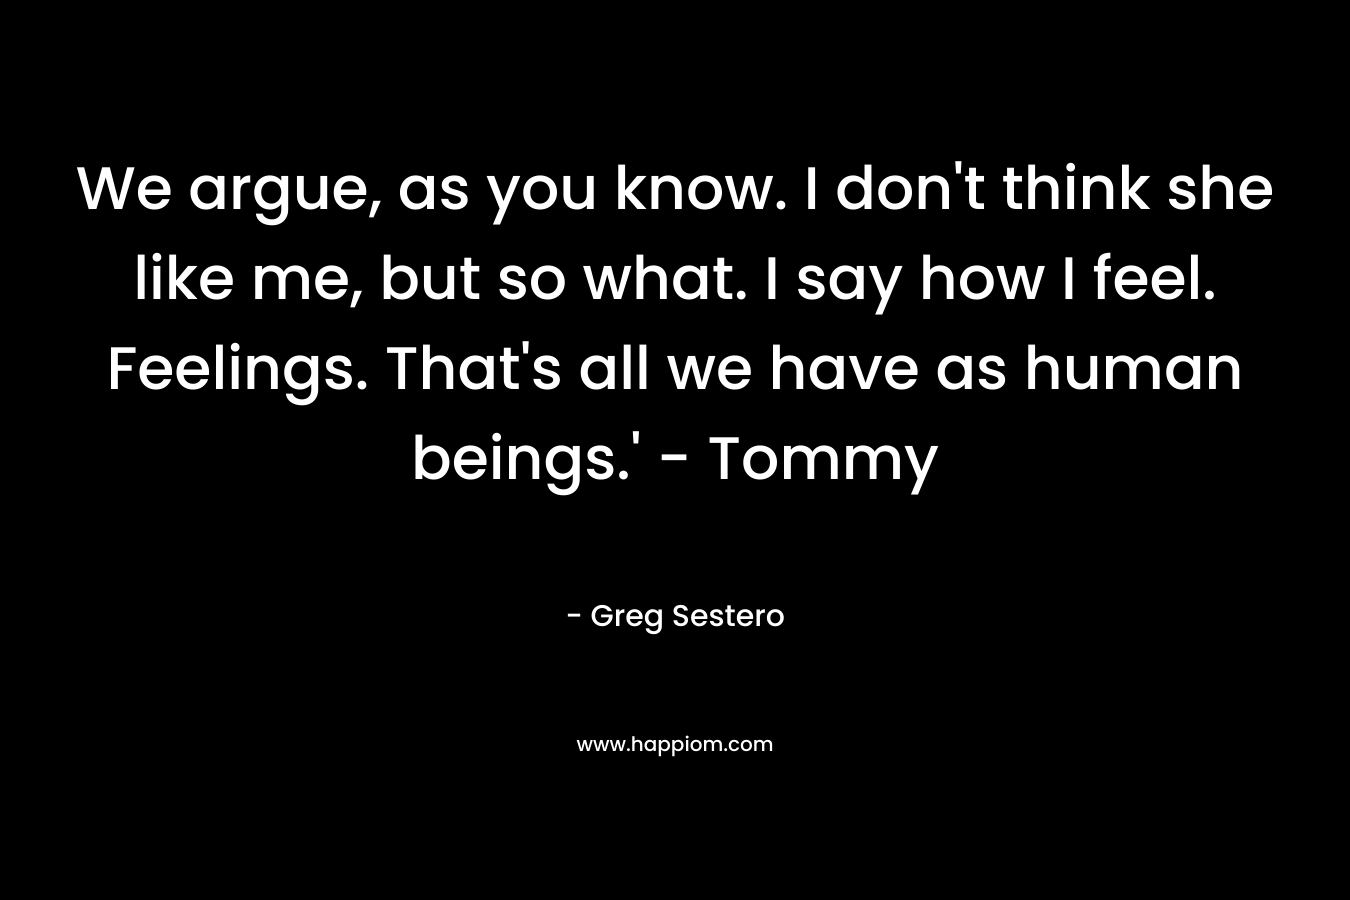 We argue, as you know. I don't think she like me, but so what. I say how I feel. Feelings. That's all we have as human beings.' - Tommy